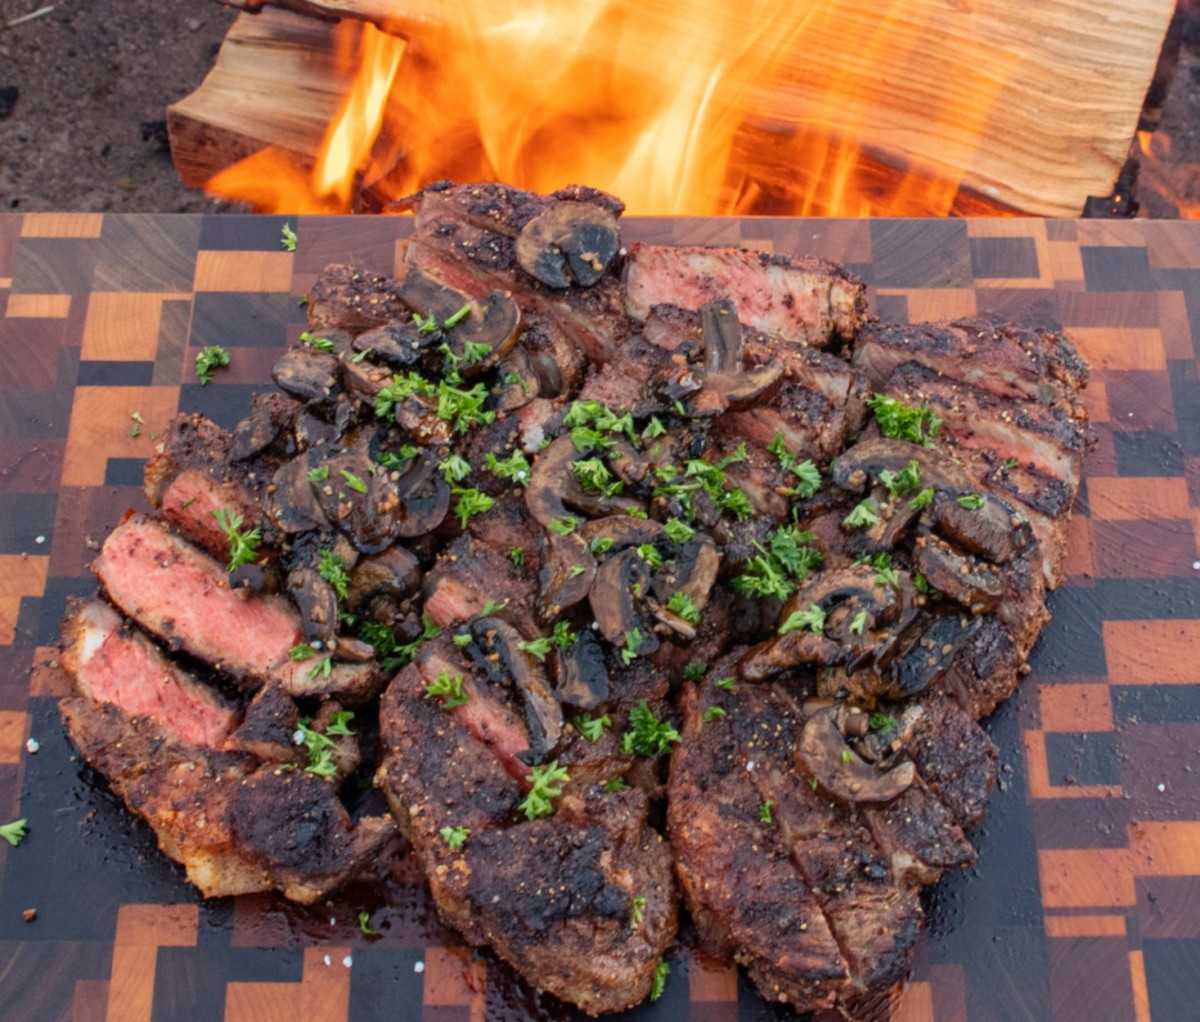 Steaks on the Coals - Over The Fire Cooking